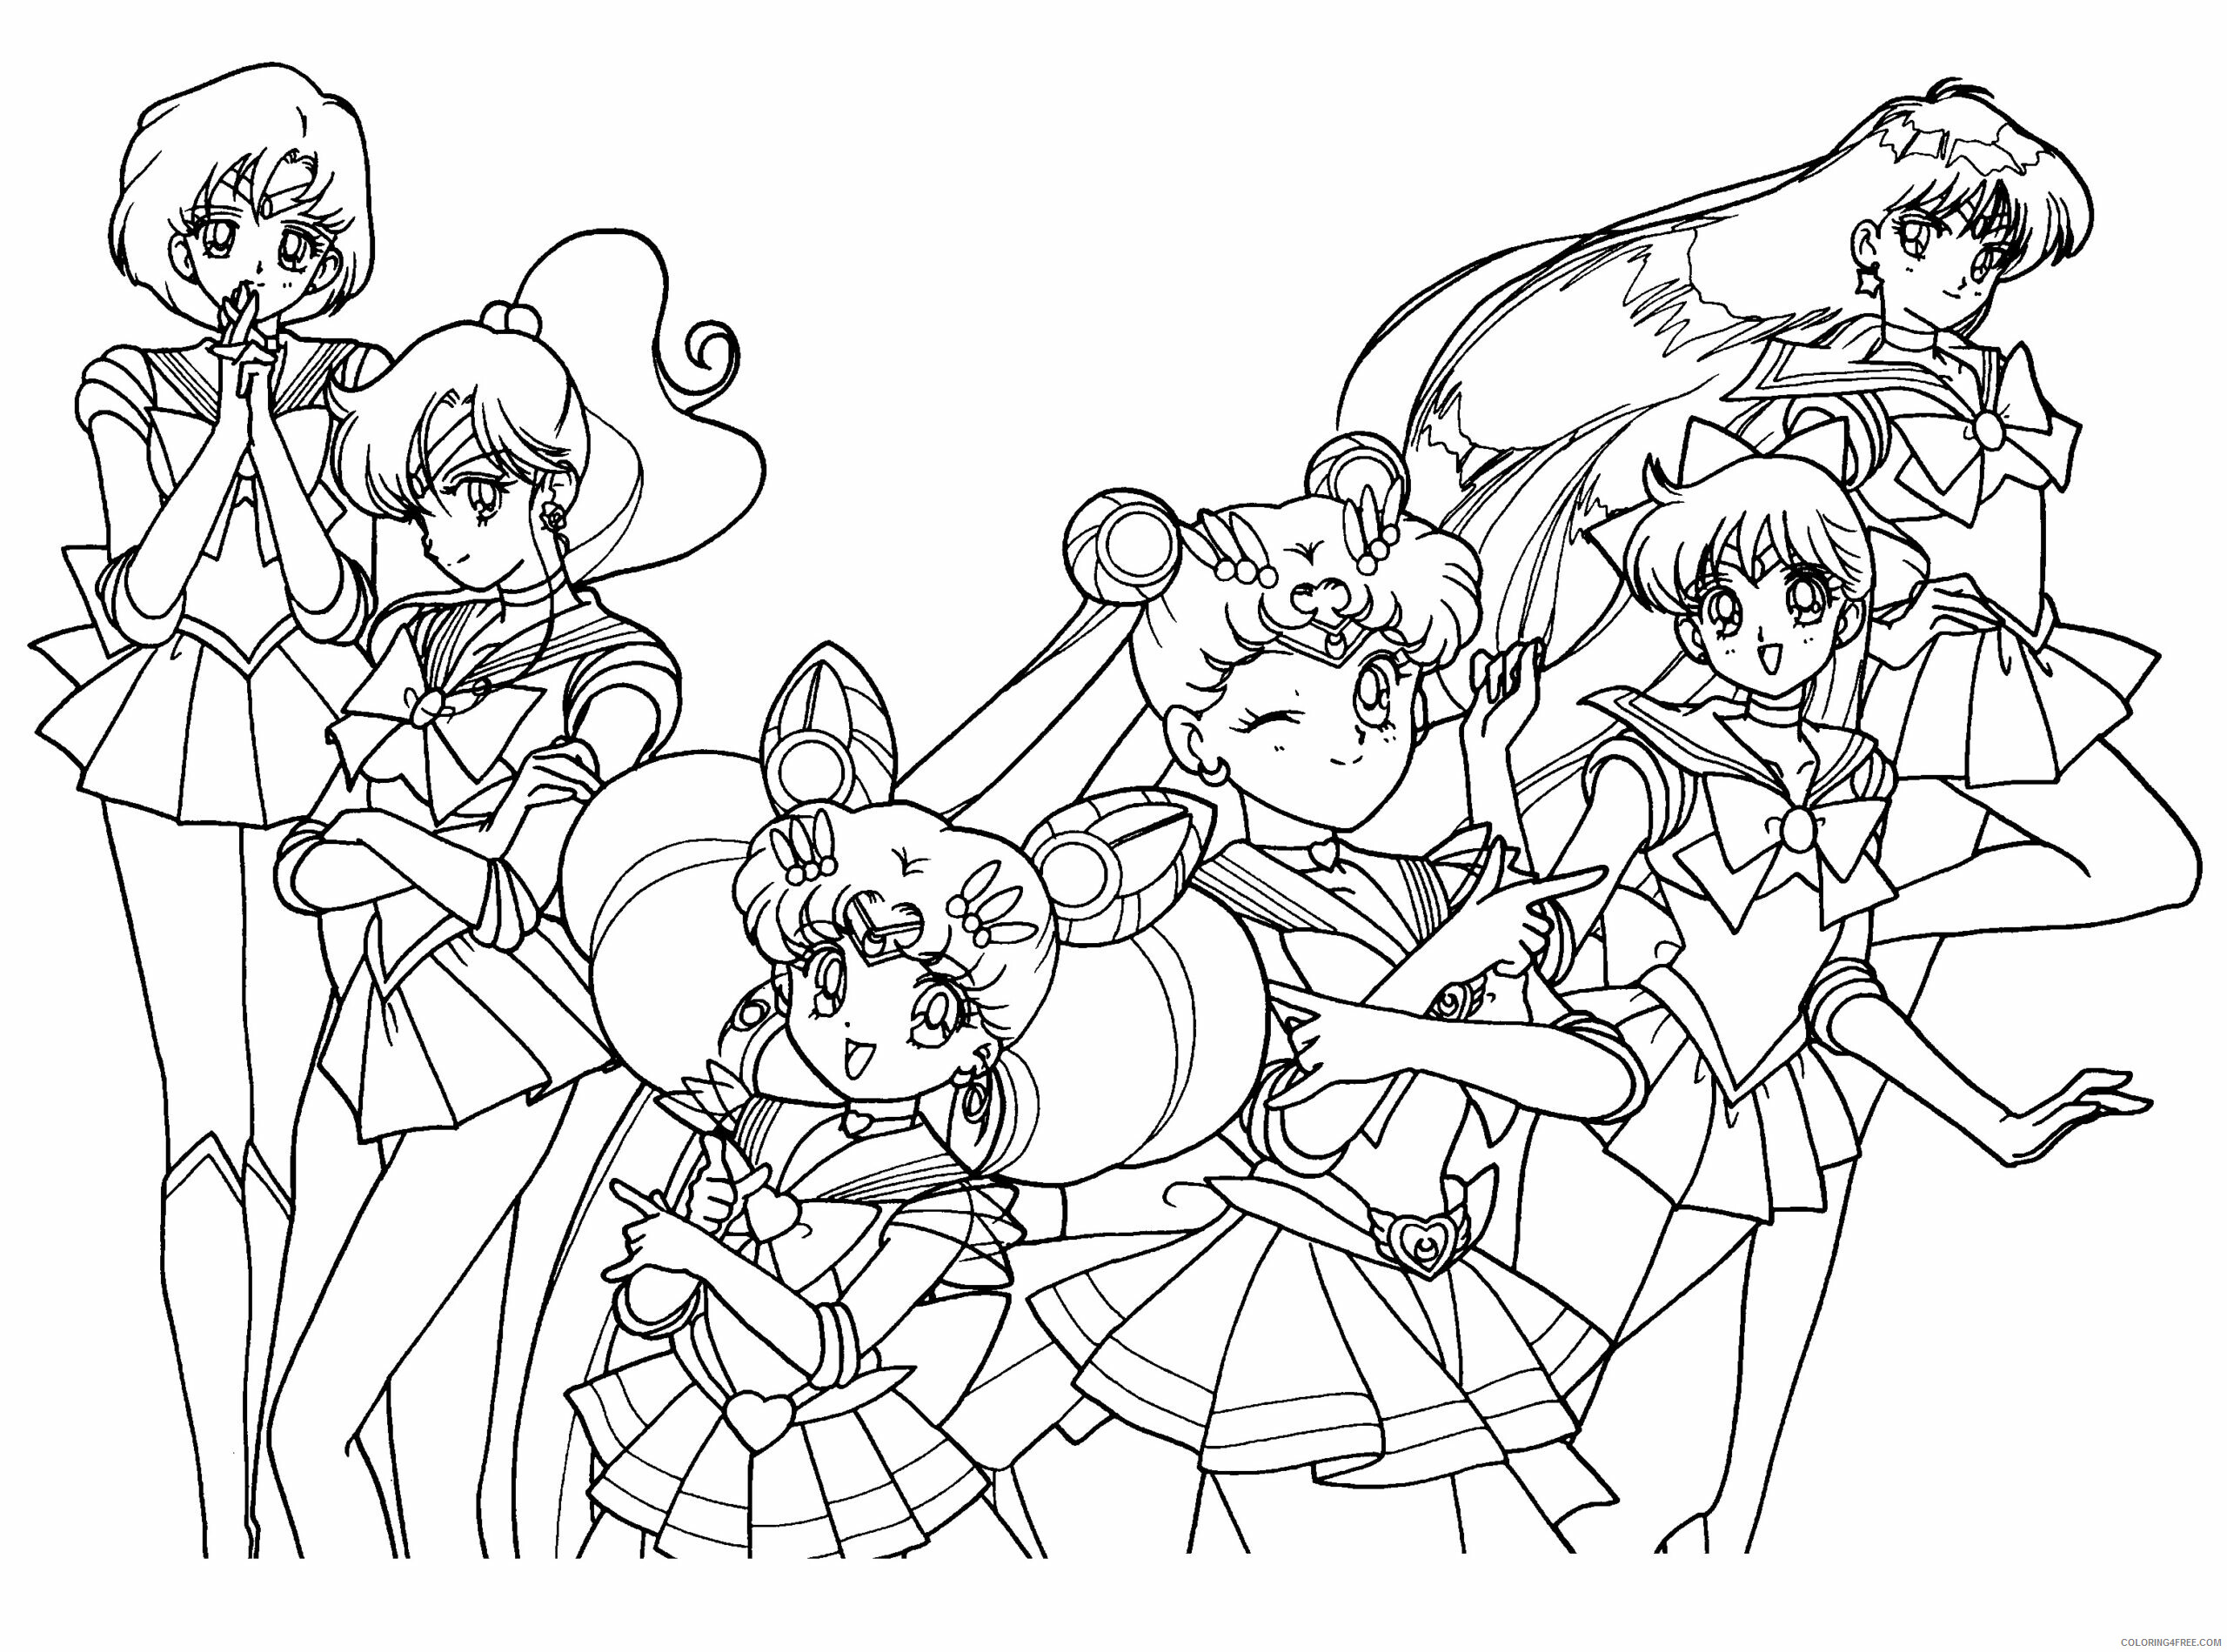 Sailor Moon Printable Coloring Pages Anime sailormoon wDvLH 2021 0998 Coloring4free